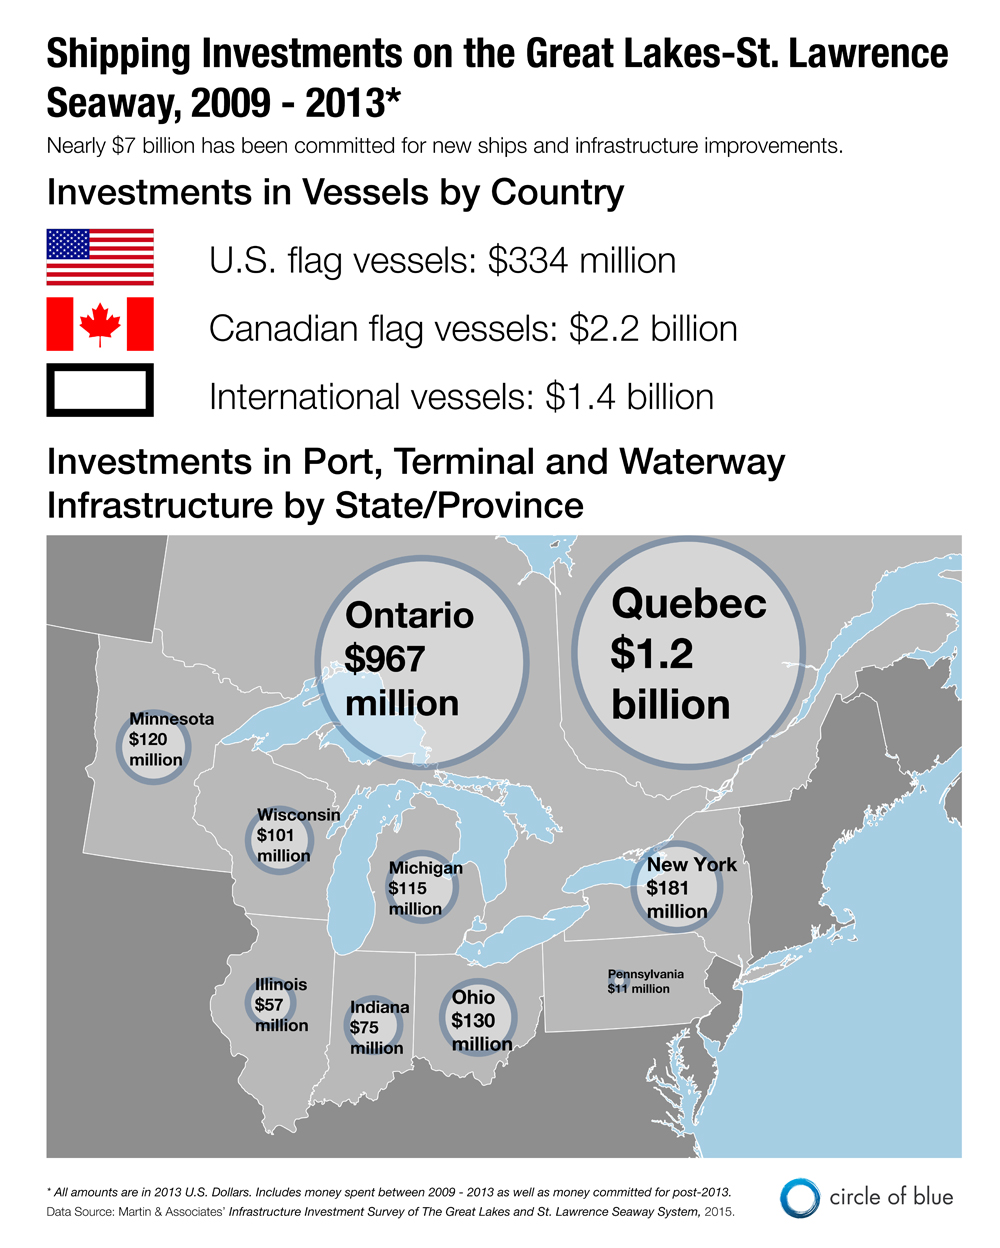 Great Lakes St. Lawrence River Seaway shipping investment graphic Kaye LaFond